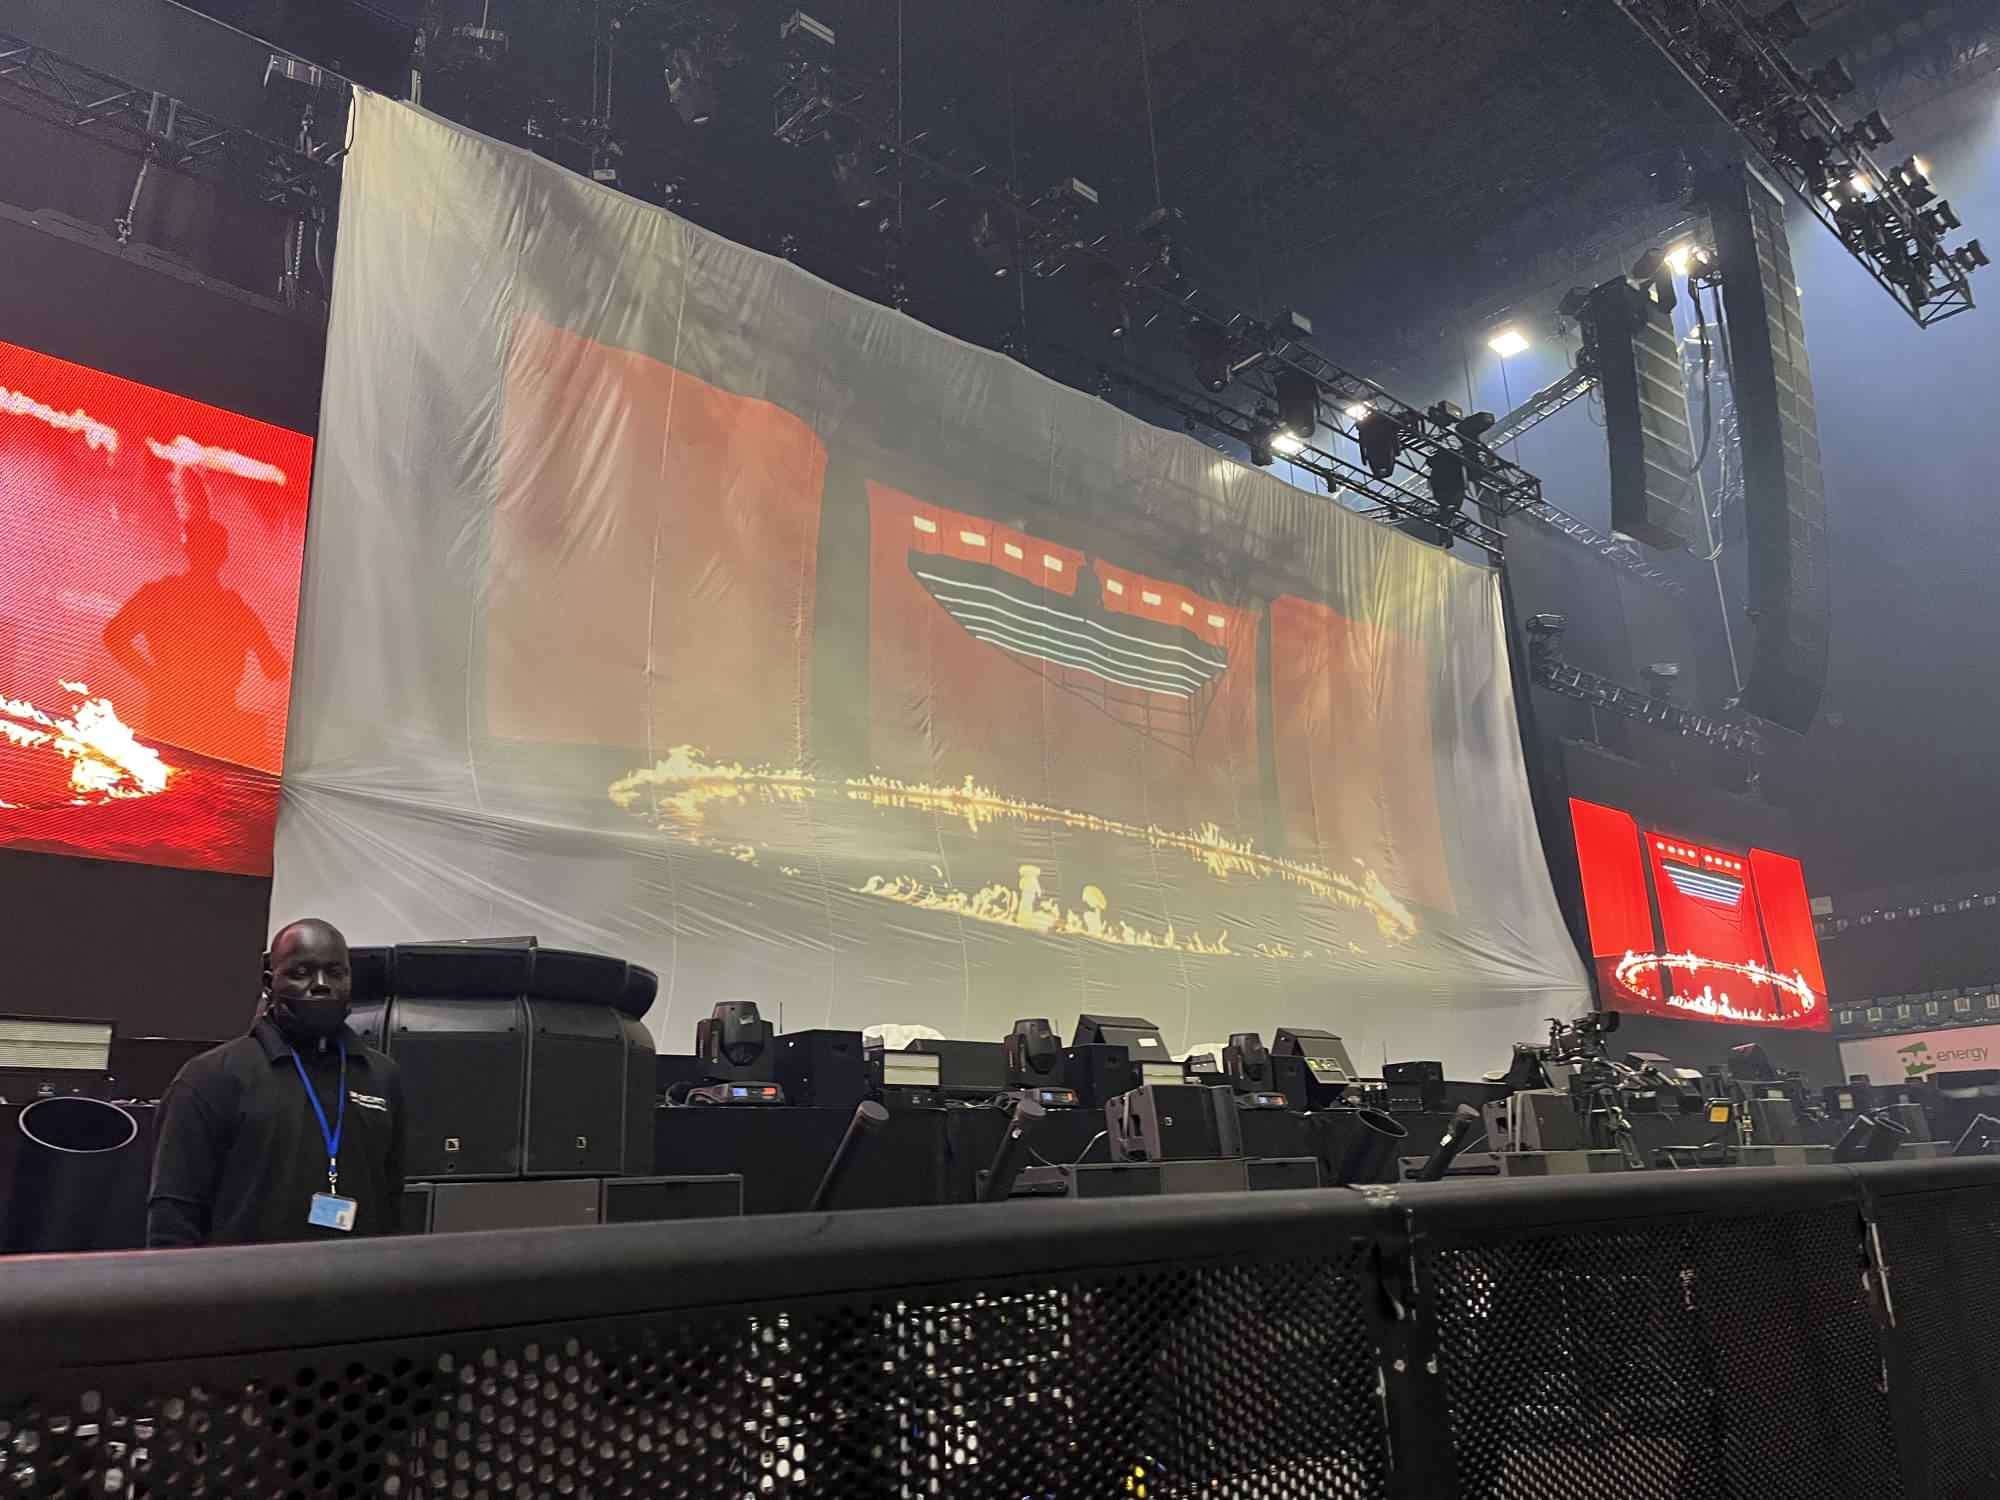 View of ATEEZ at OVO Arena Wembley from Seat Block A7